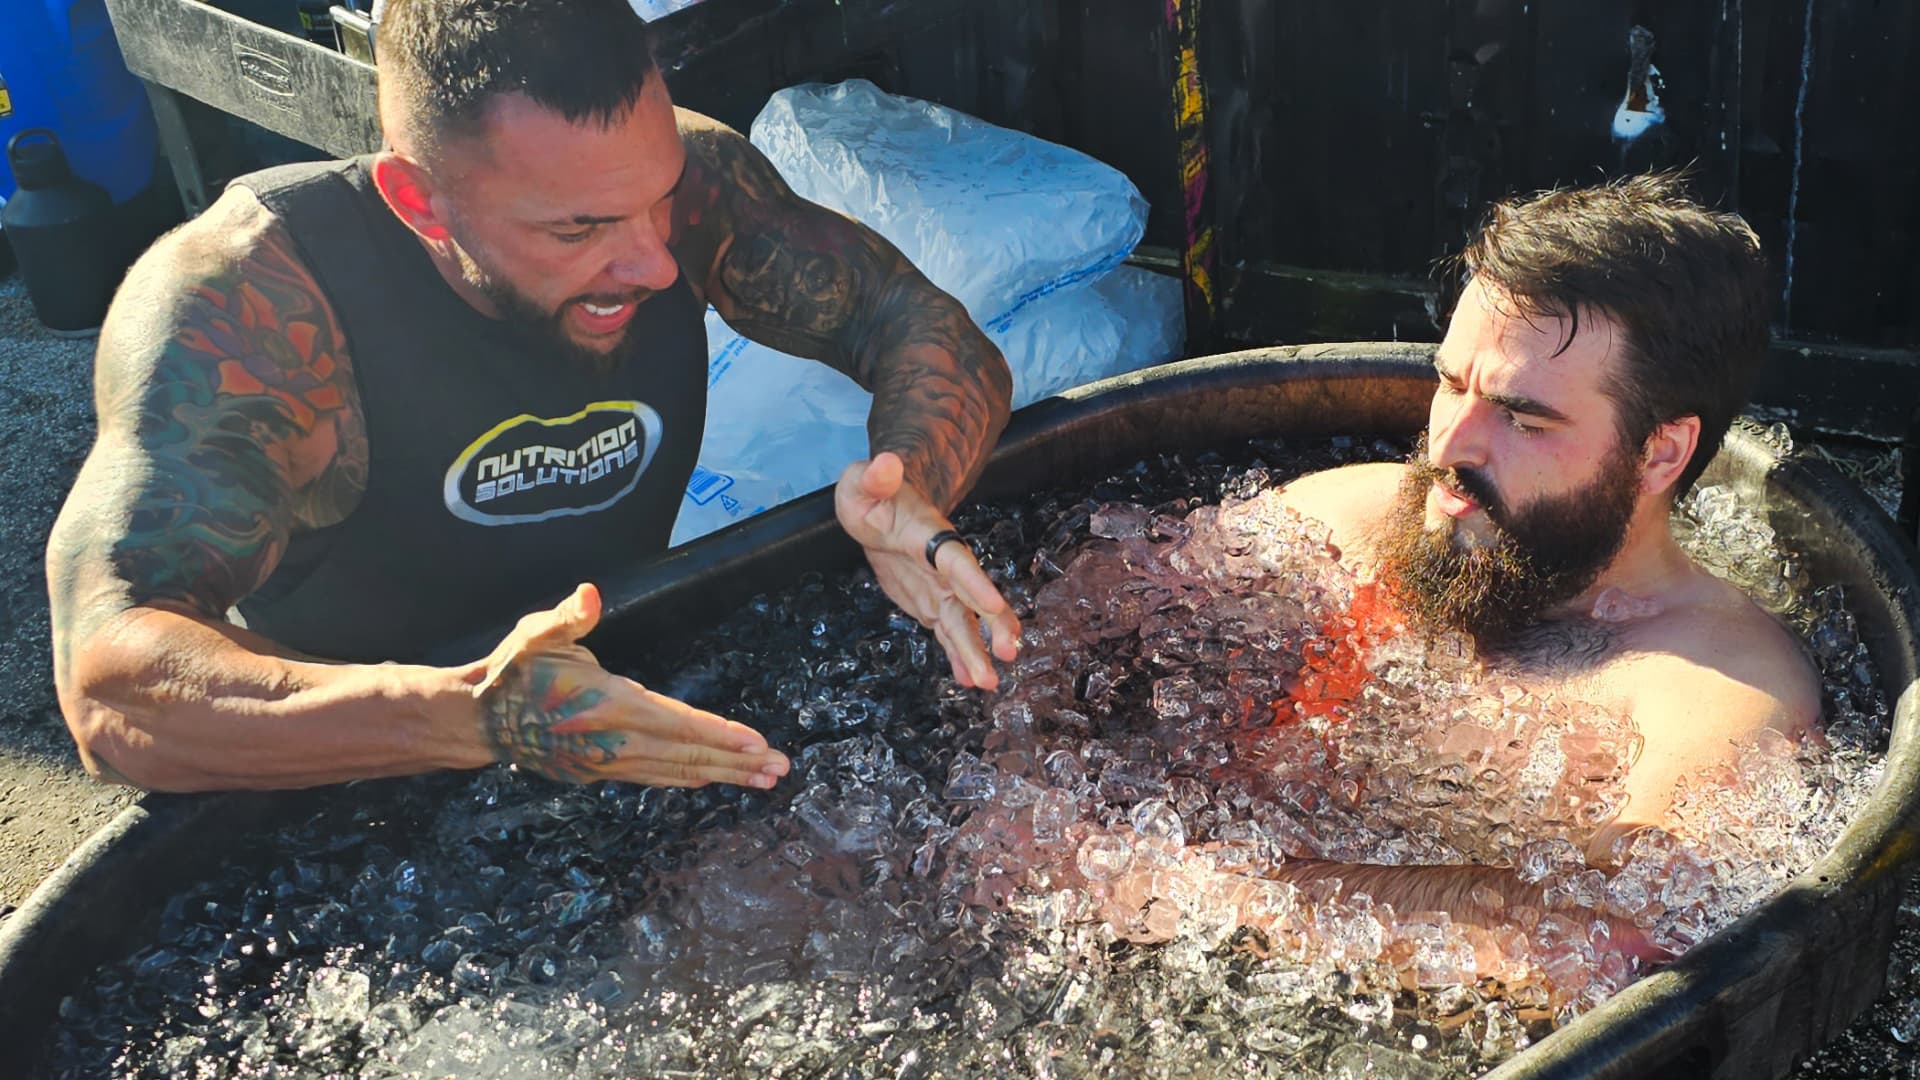 Chris Cavallini, CEO of Nutrition Solutions, guiding one of his employees during an ice bath session.